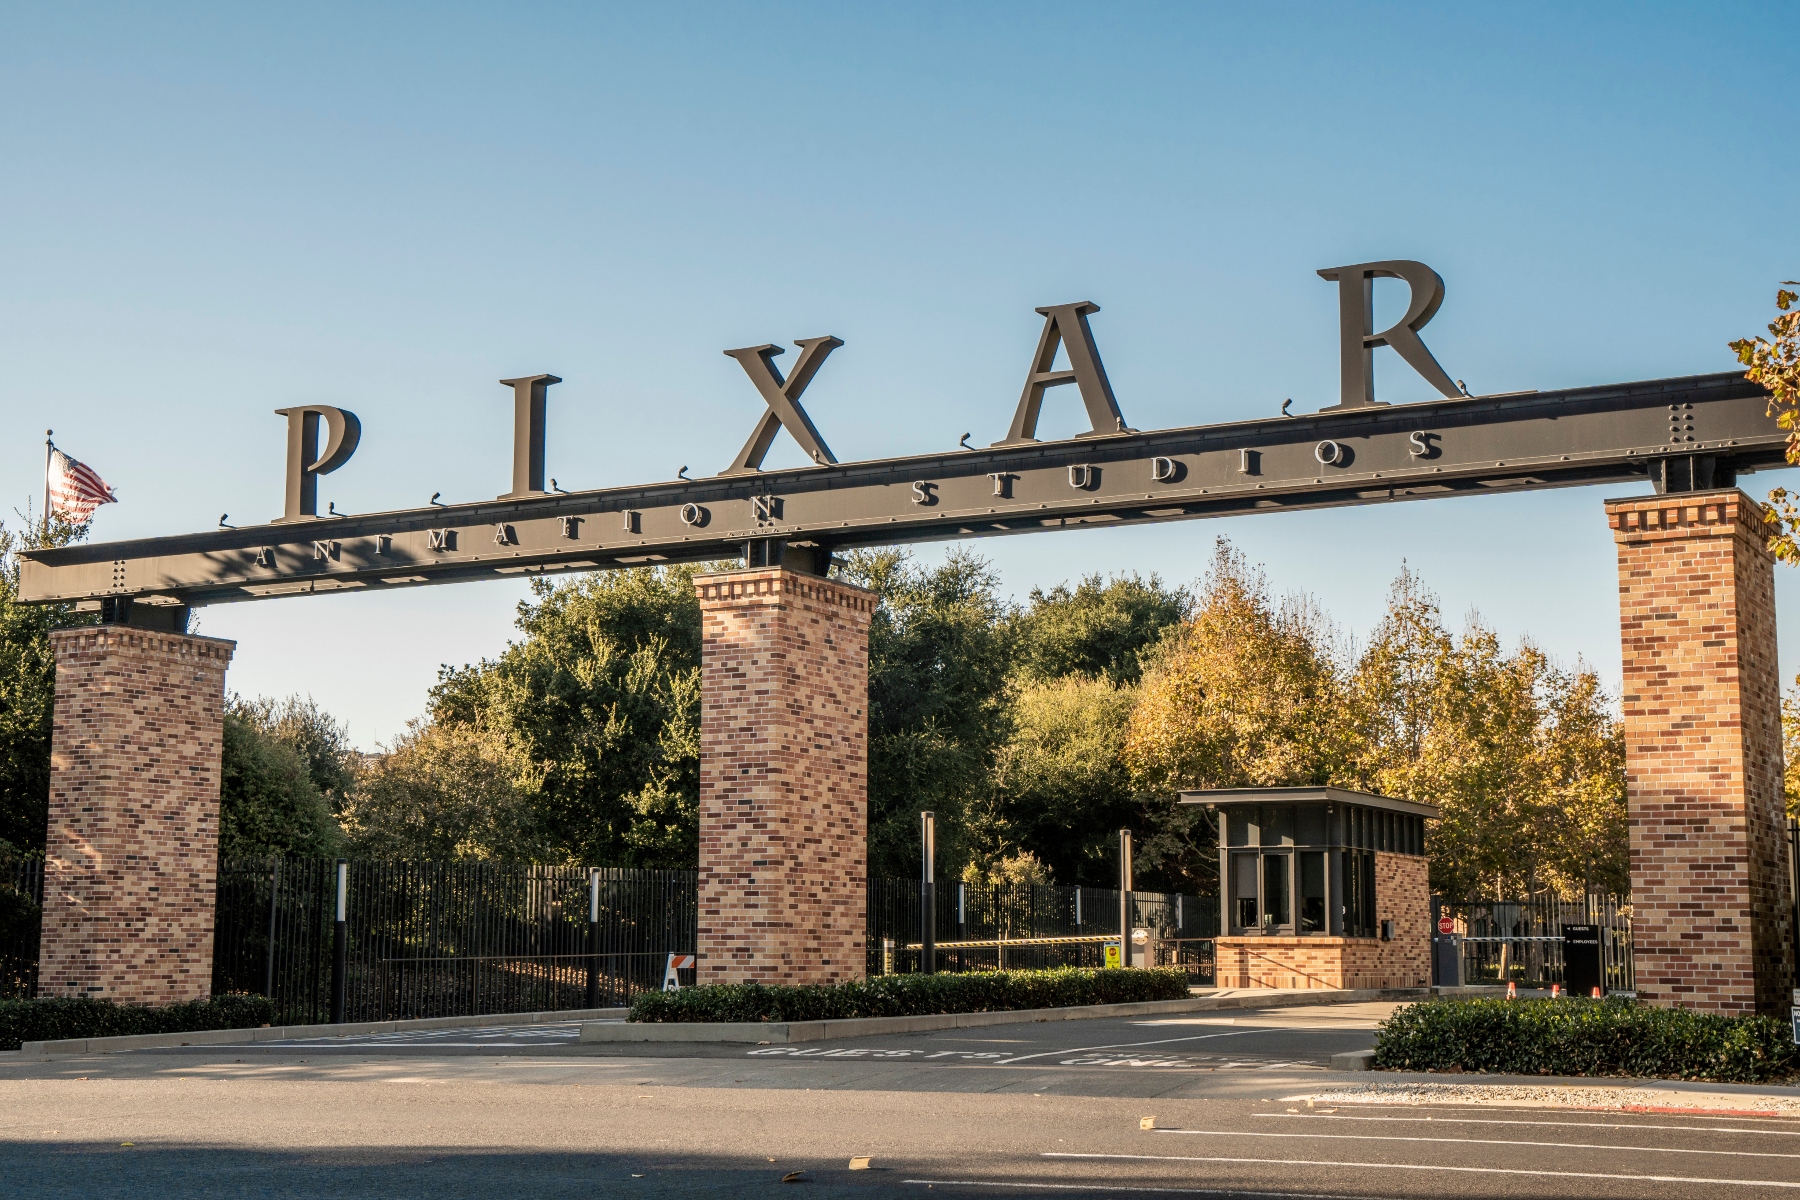 How to get a job at Pixar: Top tips from veterans